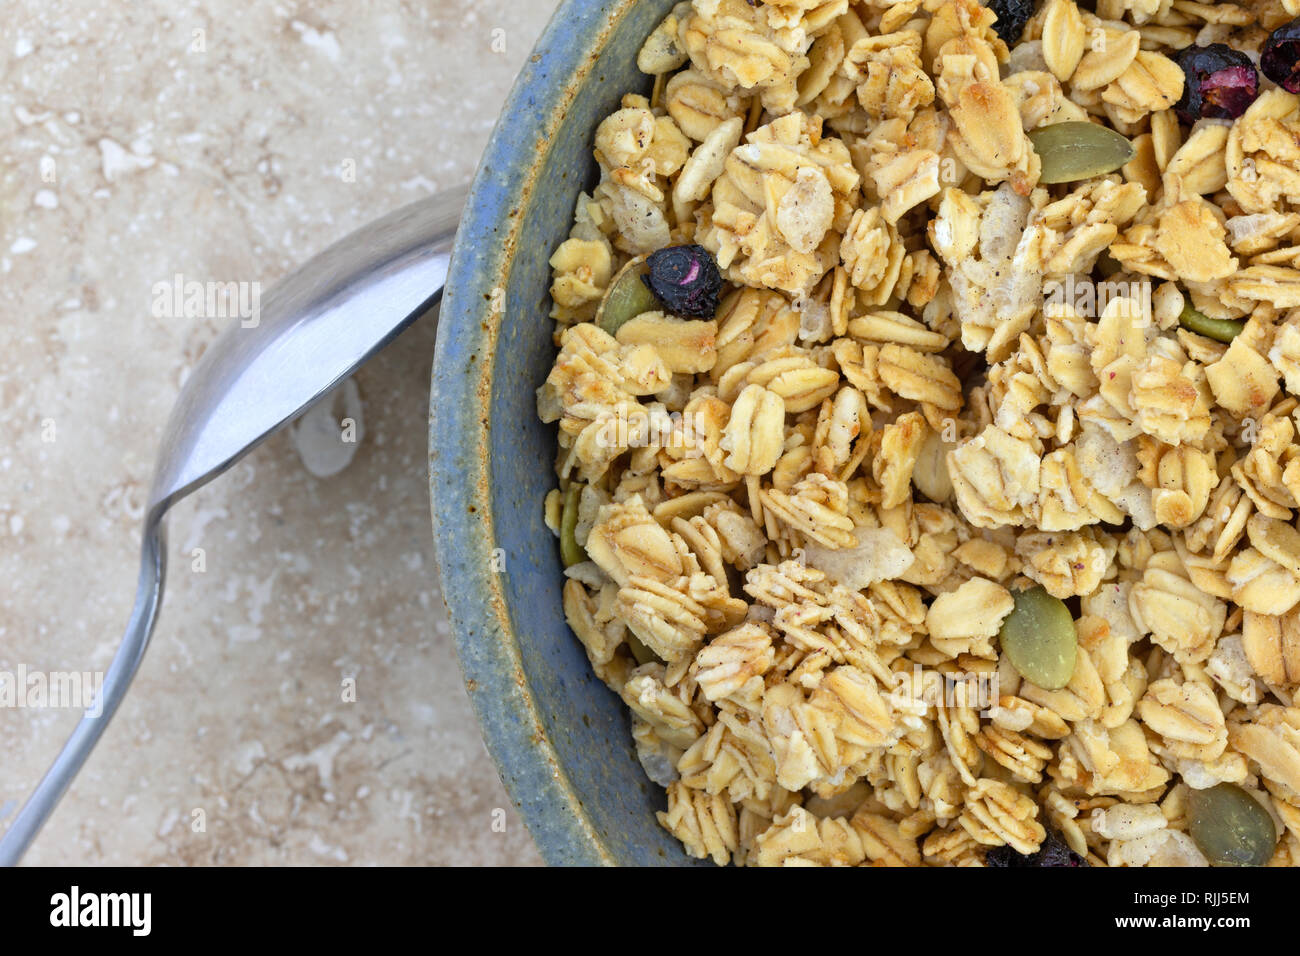 Top close view of a bowl of dry organic breakfast cereal with dried blueberries and pumpkin seeds plus a spoon in the food on a marble table. Stock Photo